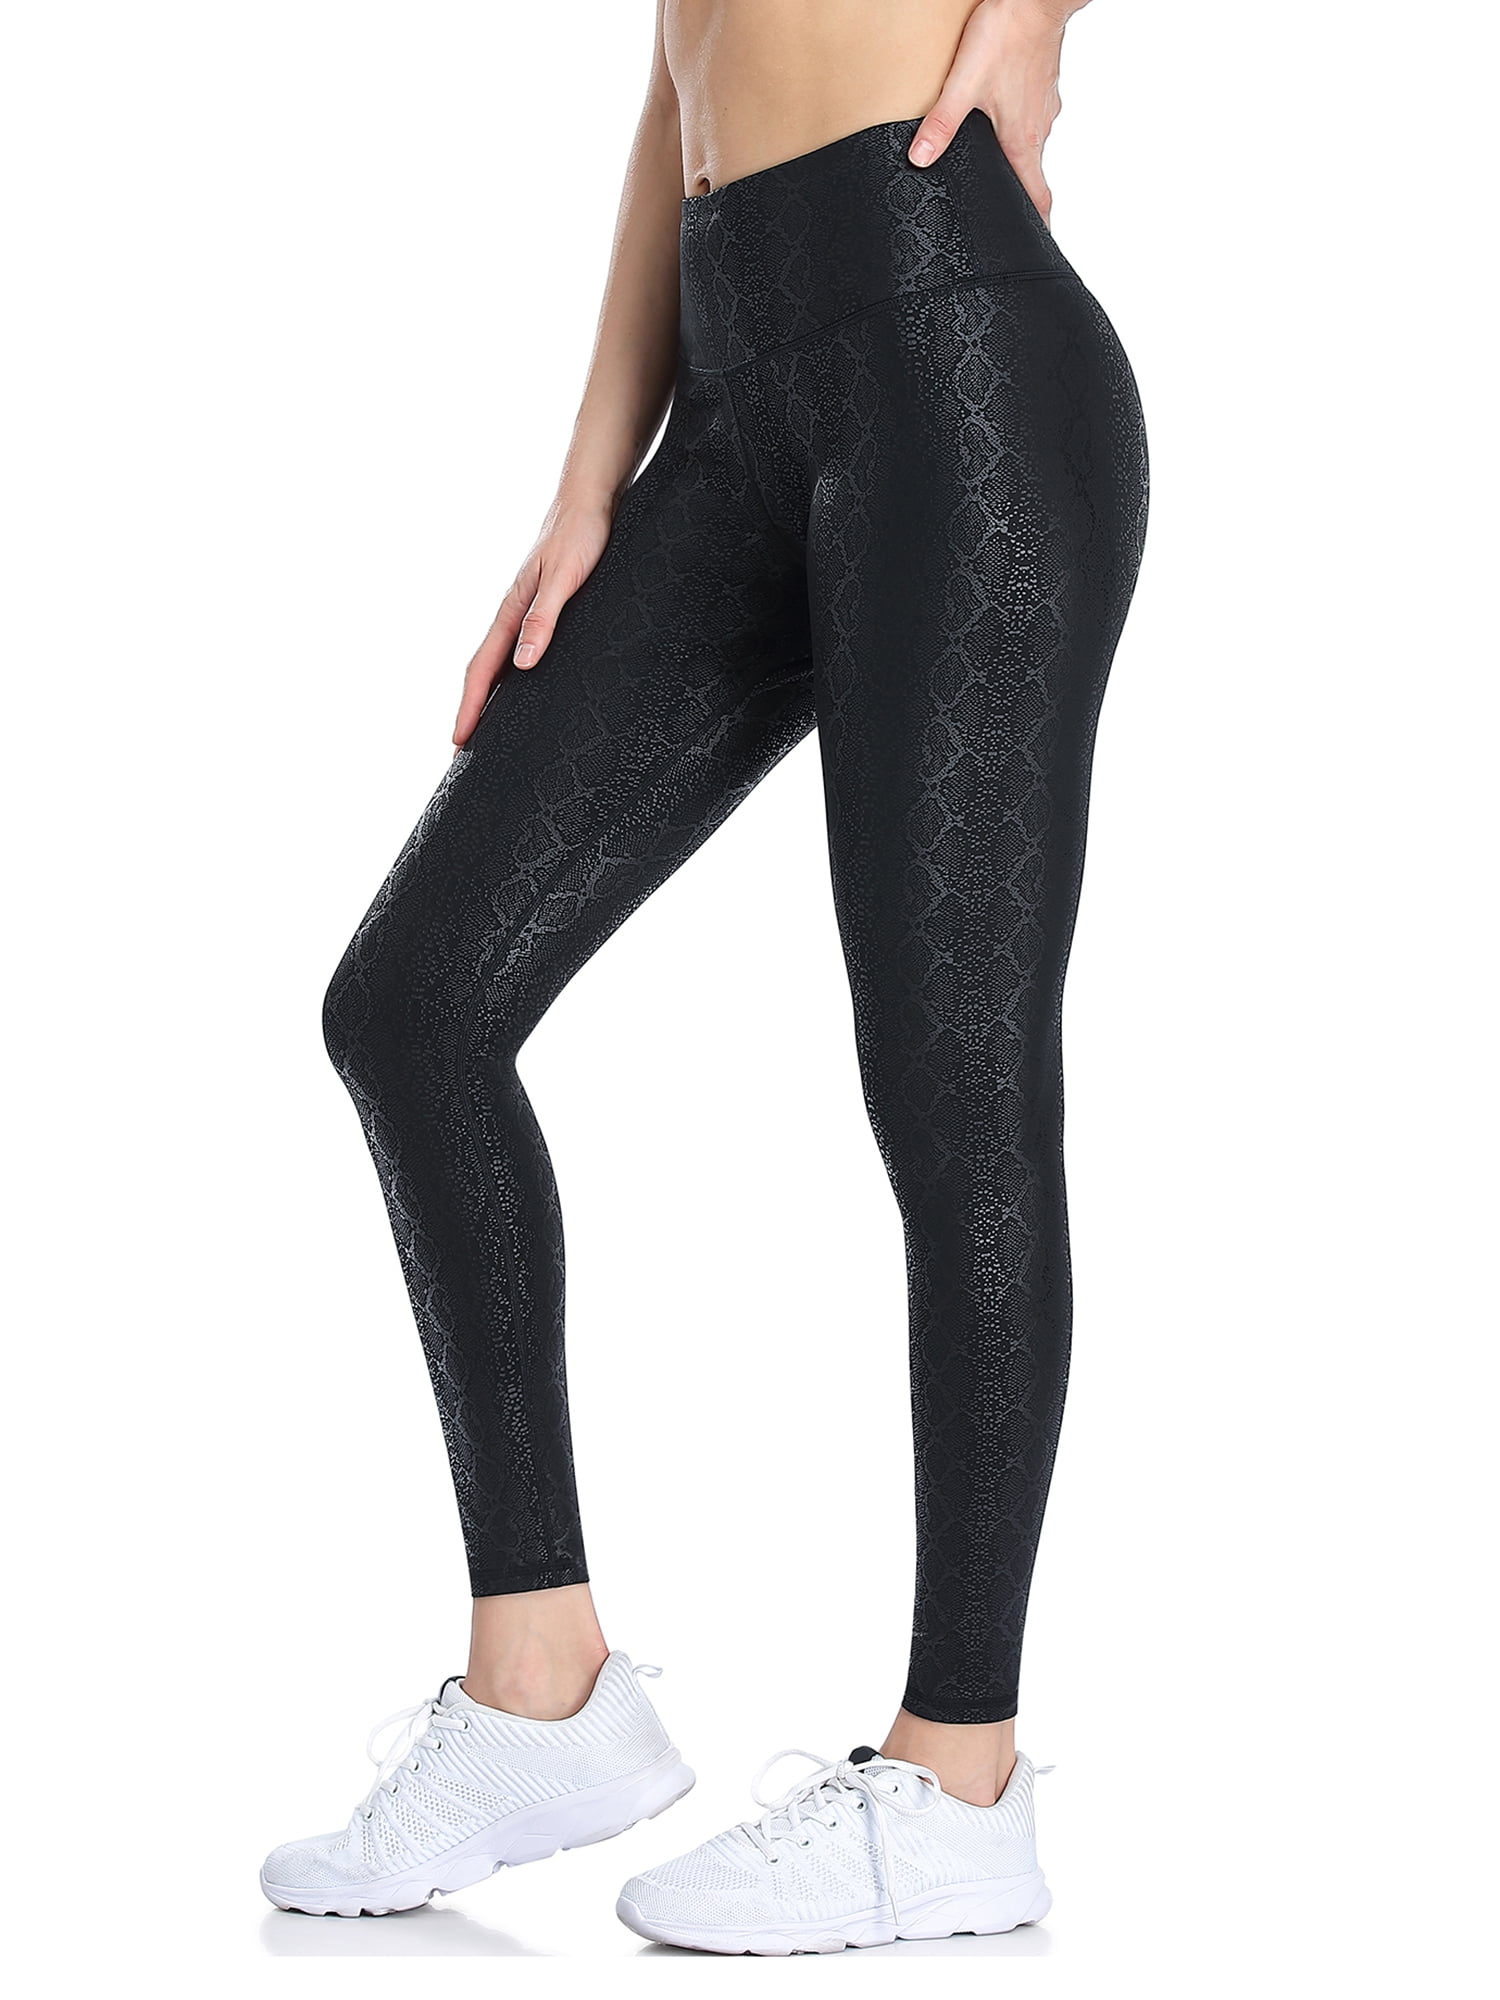 Thermal Fleece Lined Leggings Women - Winter Warm High Waisted Hiking Pants  Workout Running Tights 